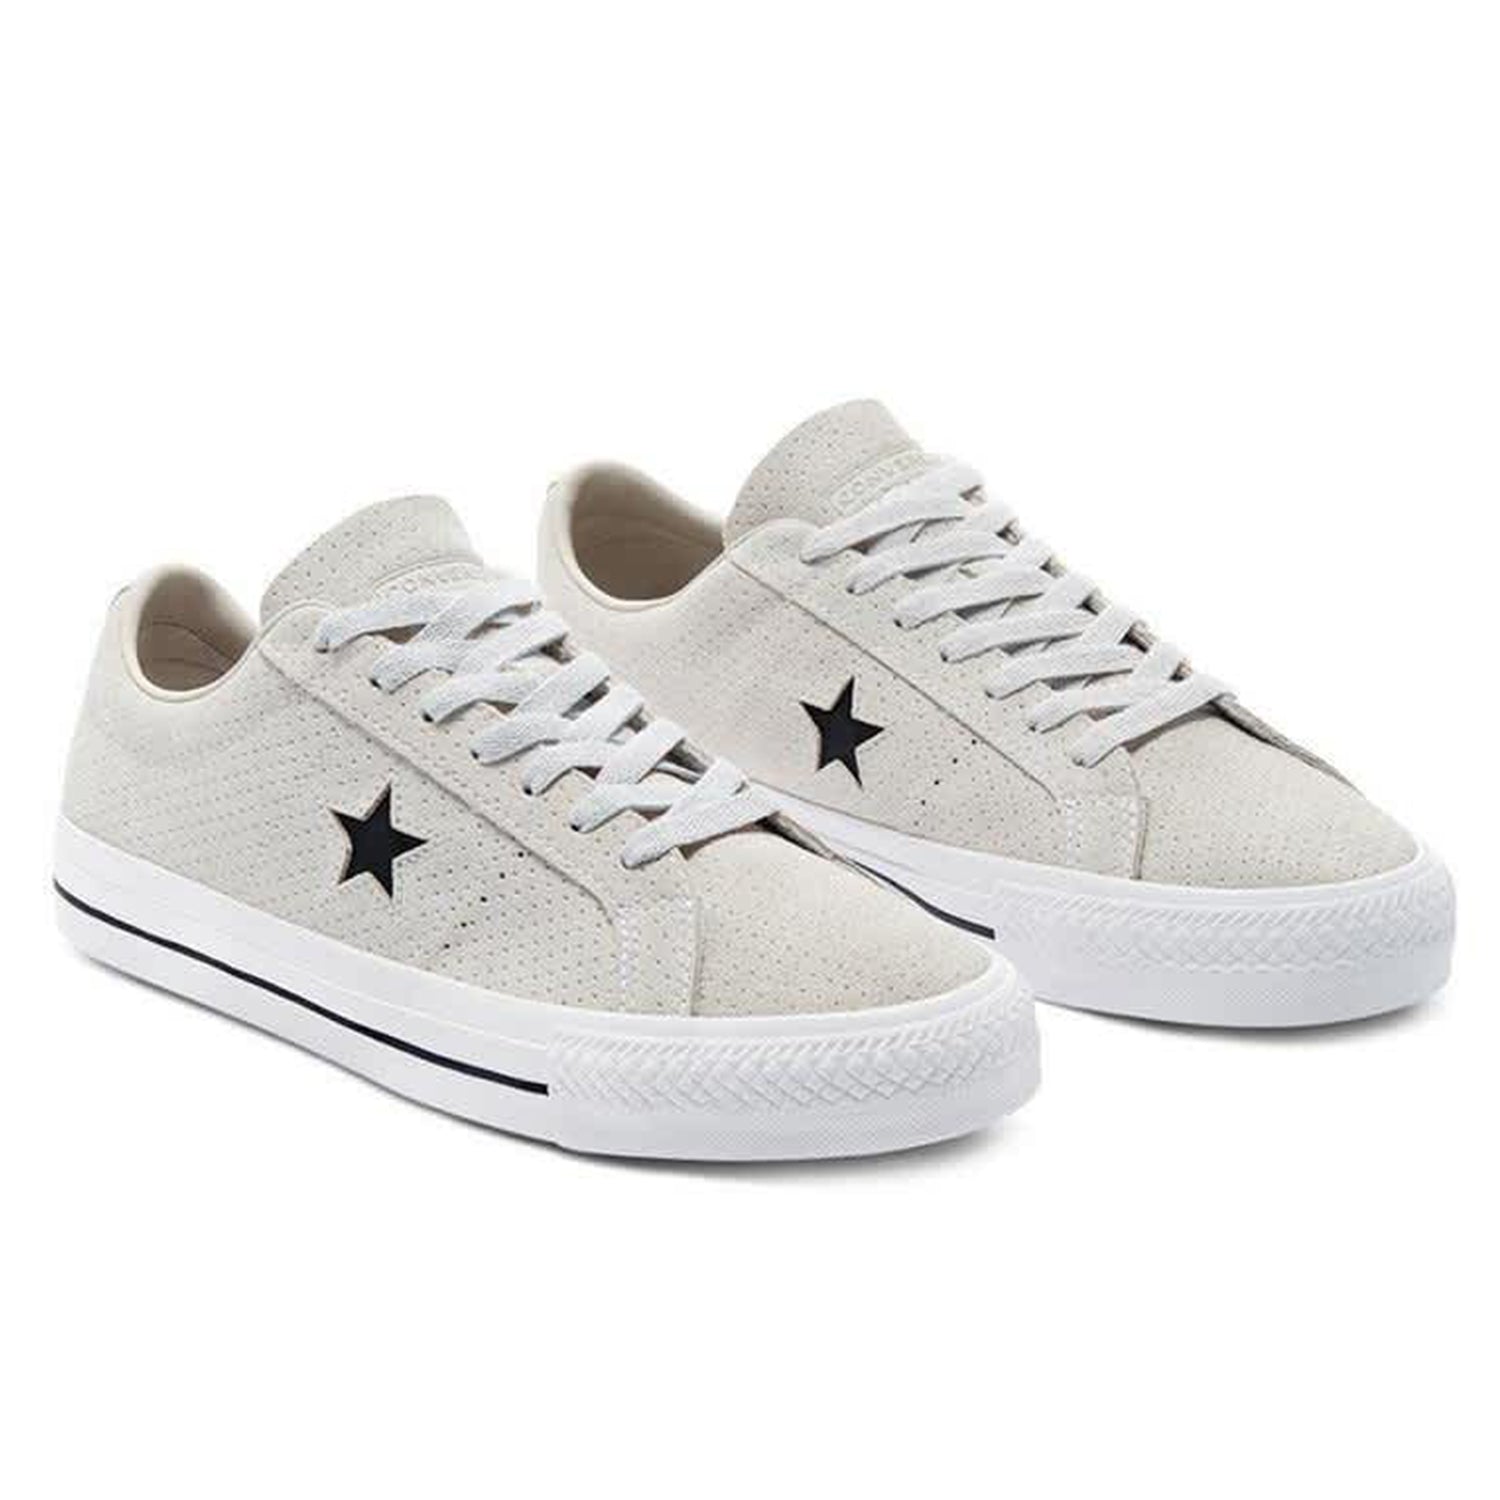 CONS One Star Pro Shoe